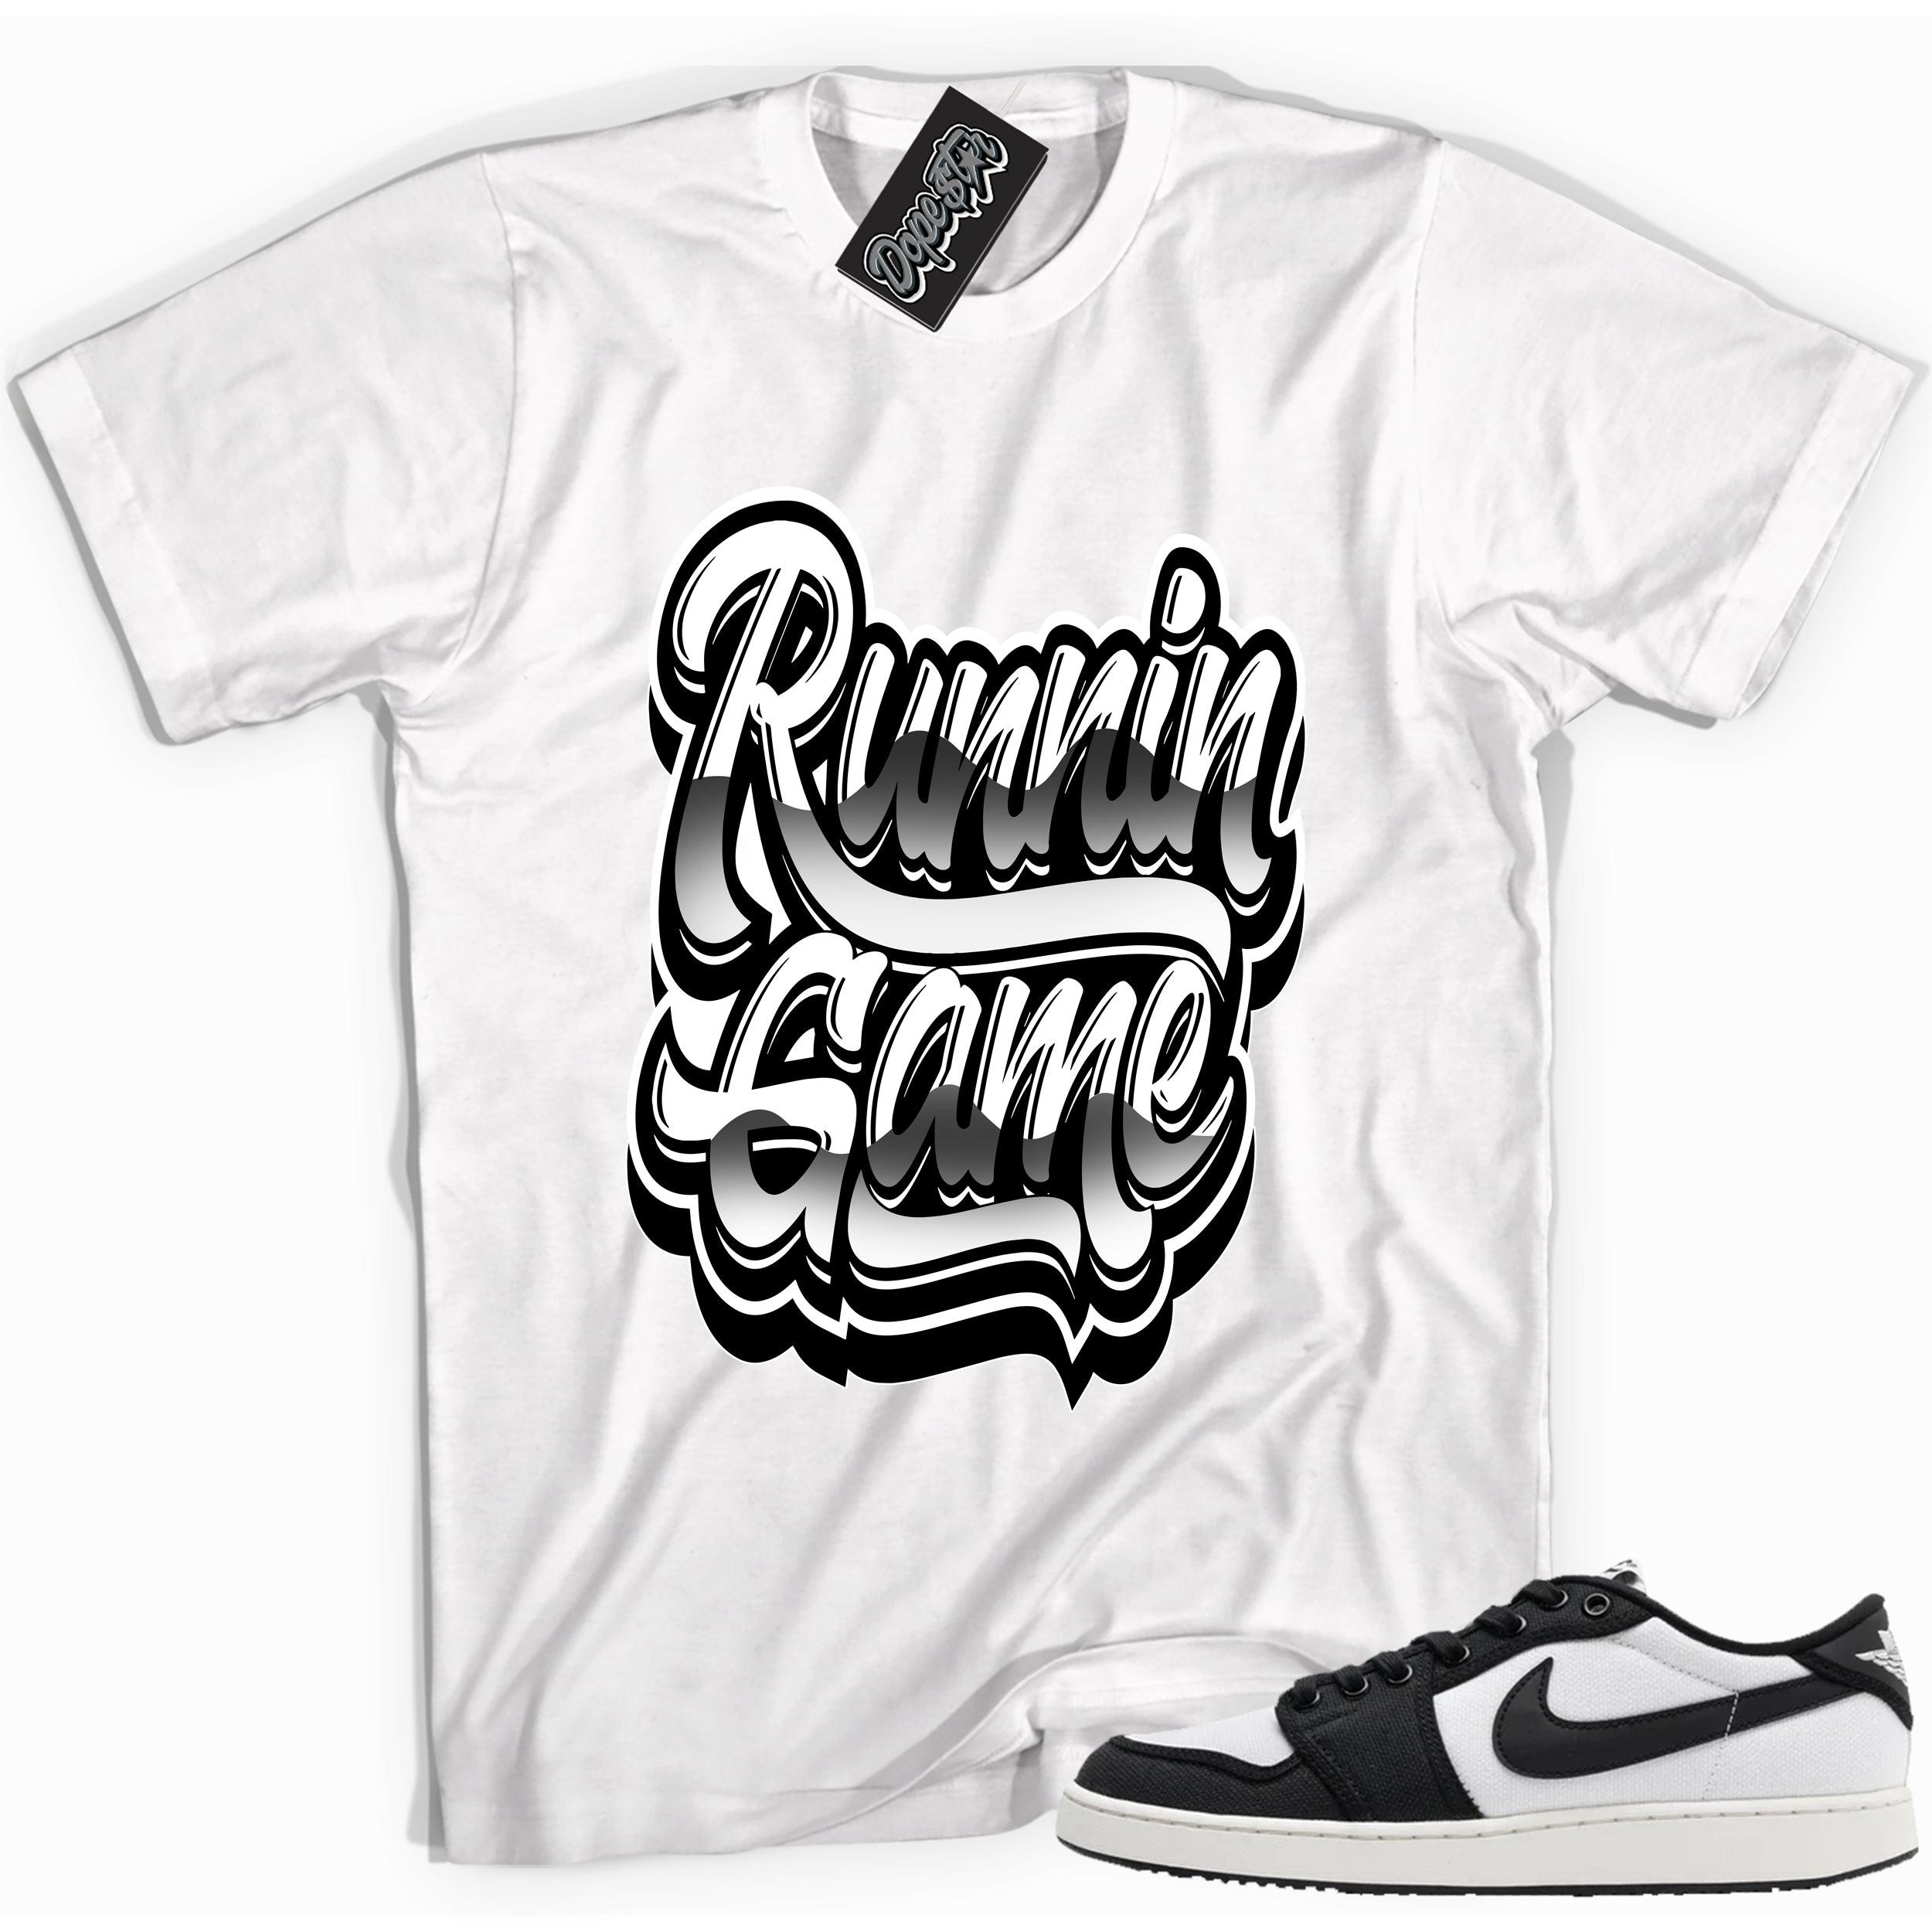 Cool white graphic tee with 'running game' print, that perfectly matches Air Jordan 1 Retro Ajko Low Black & White sneakers.